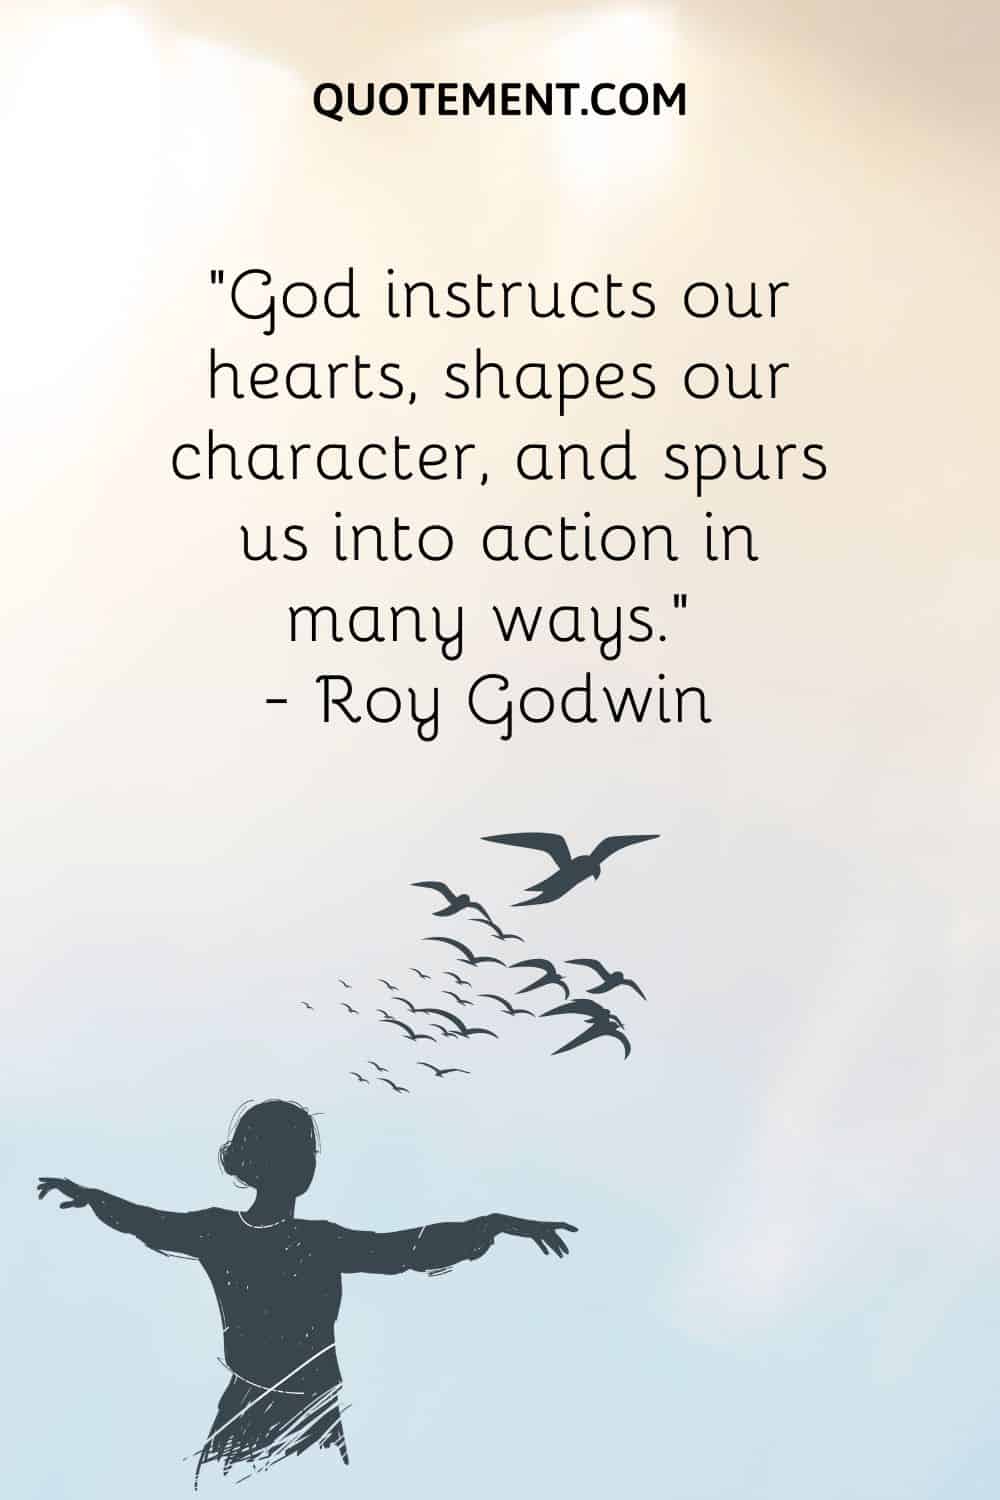 “God instructs our hearts, shapes our character, and spurs us into action in many ways.” ― Roy Godwin